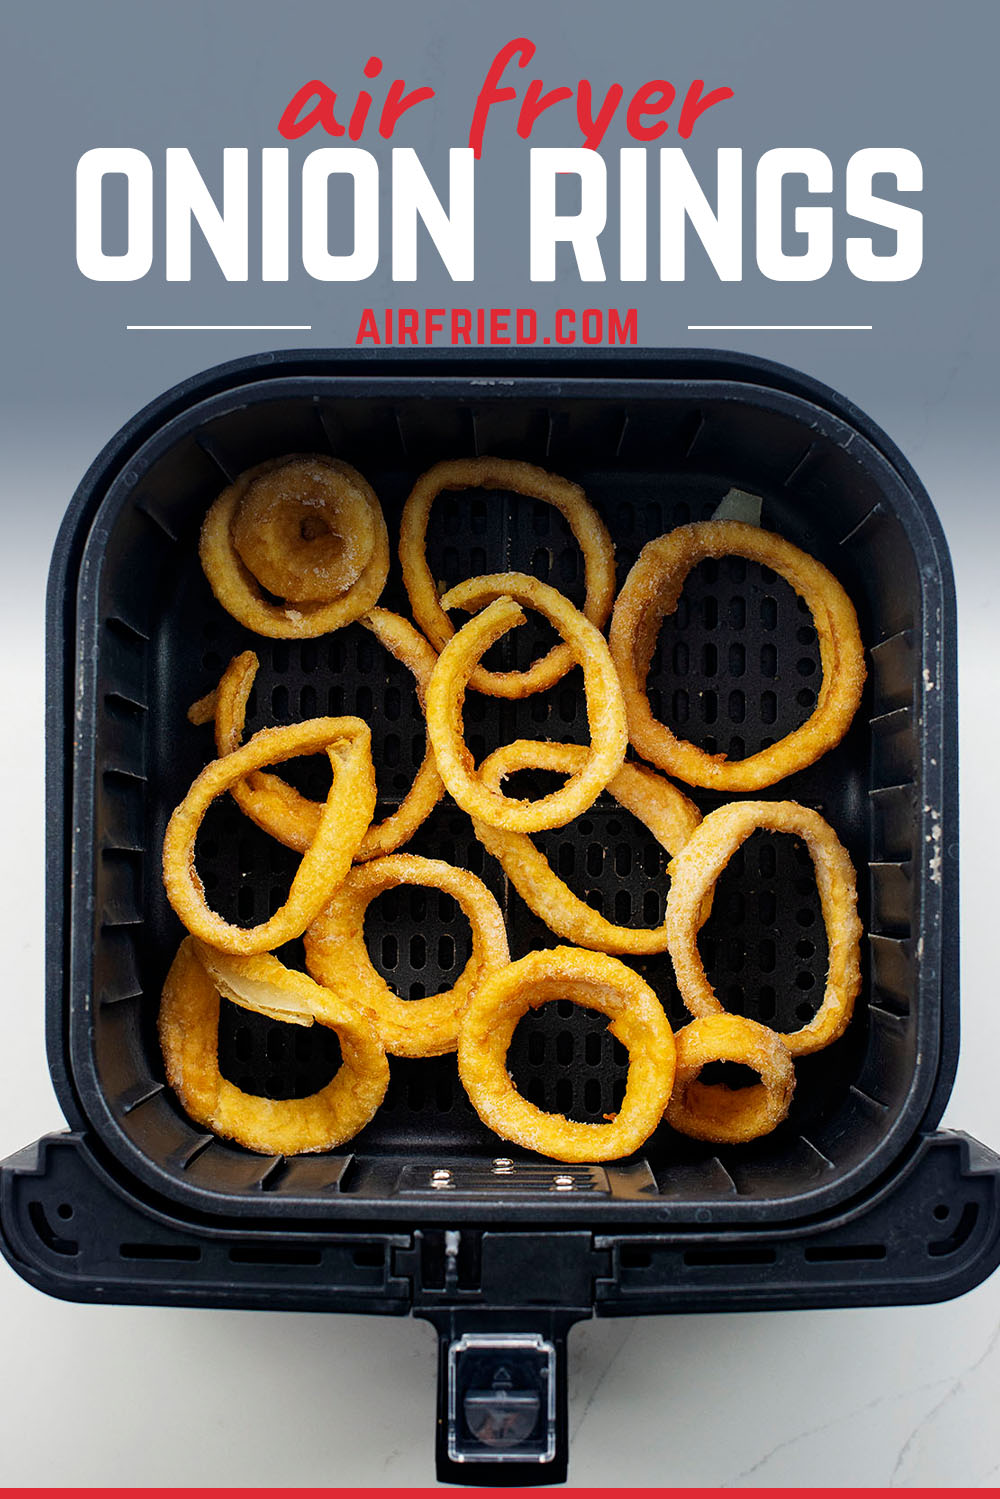 Overhead view of onion rings in an air fryer basket.